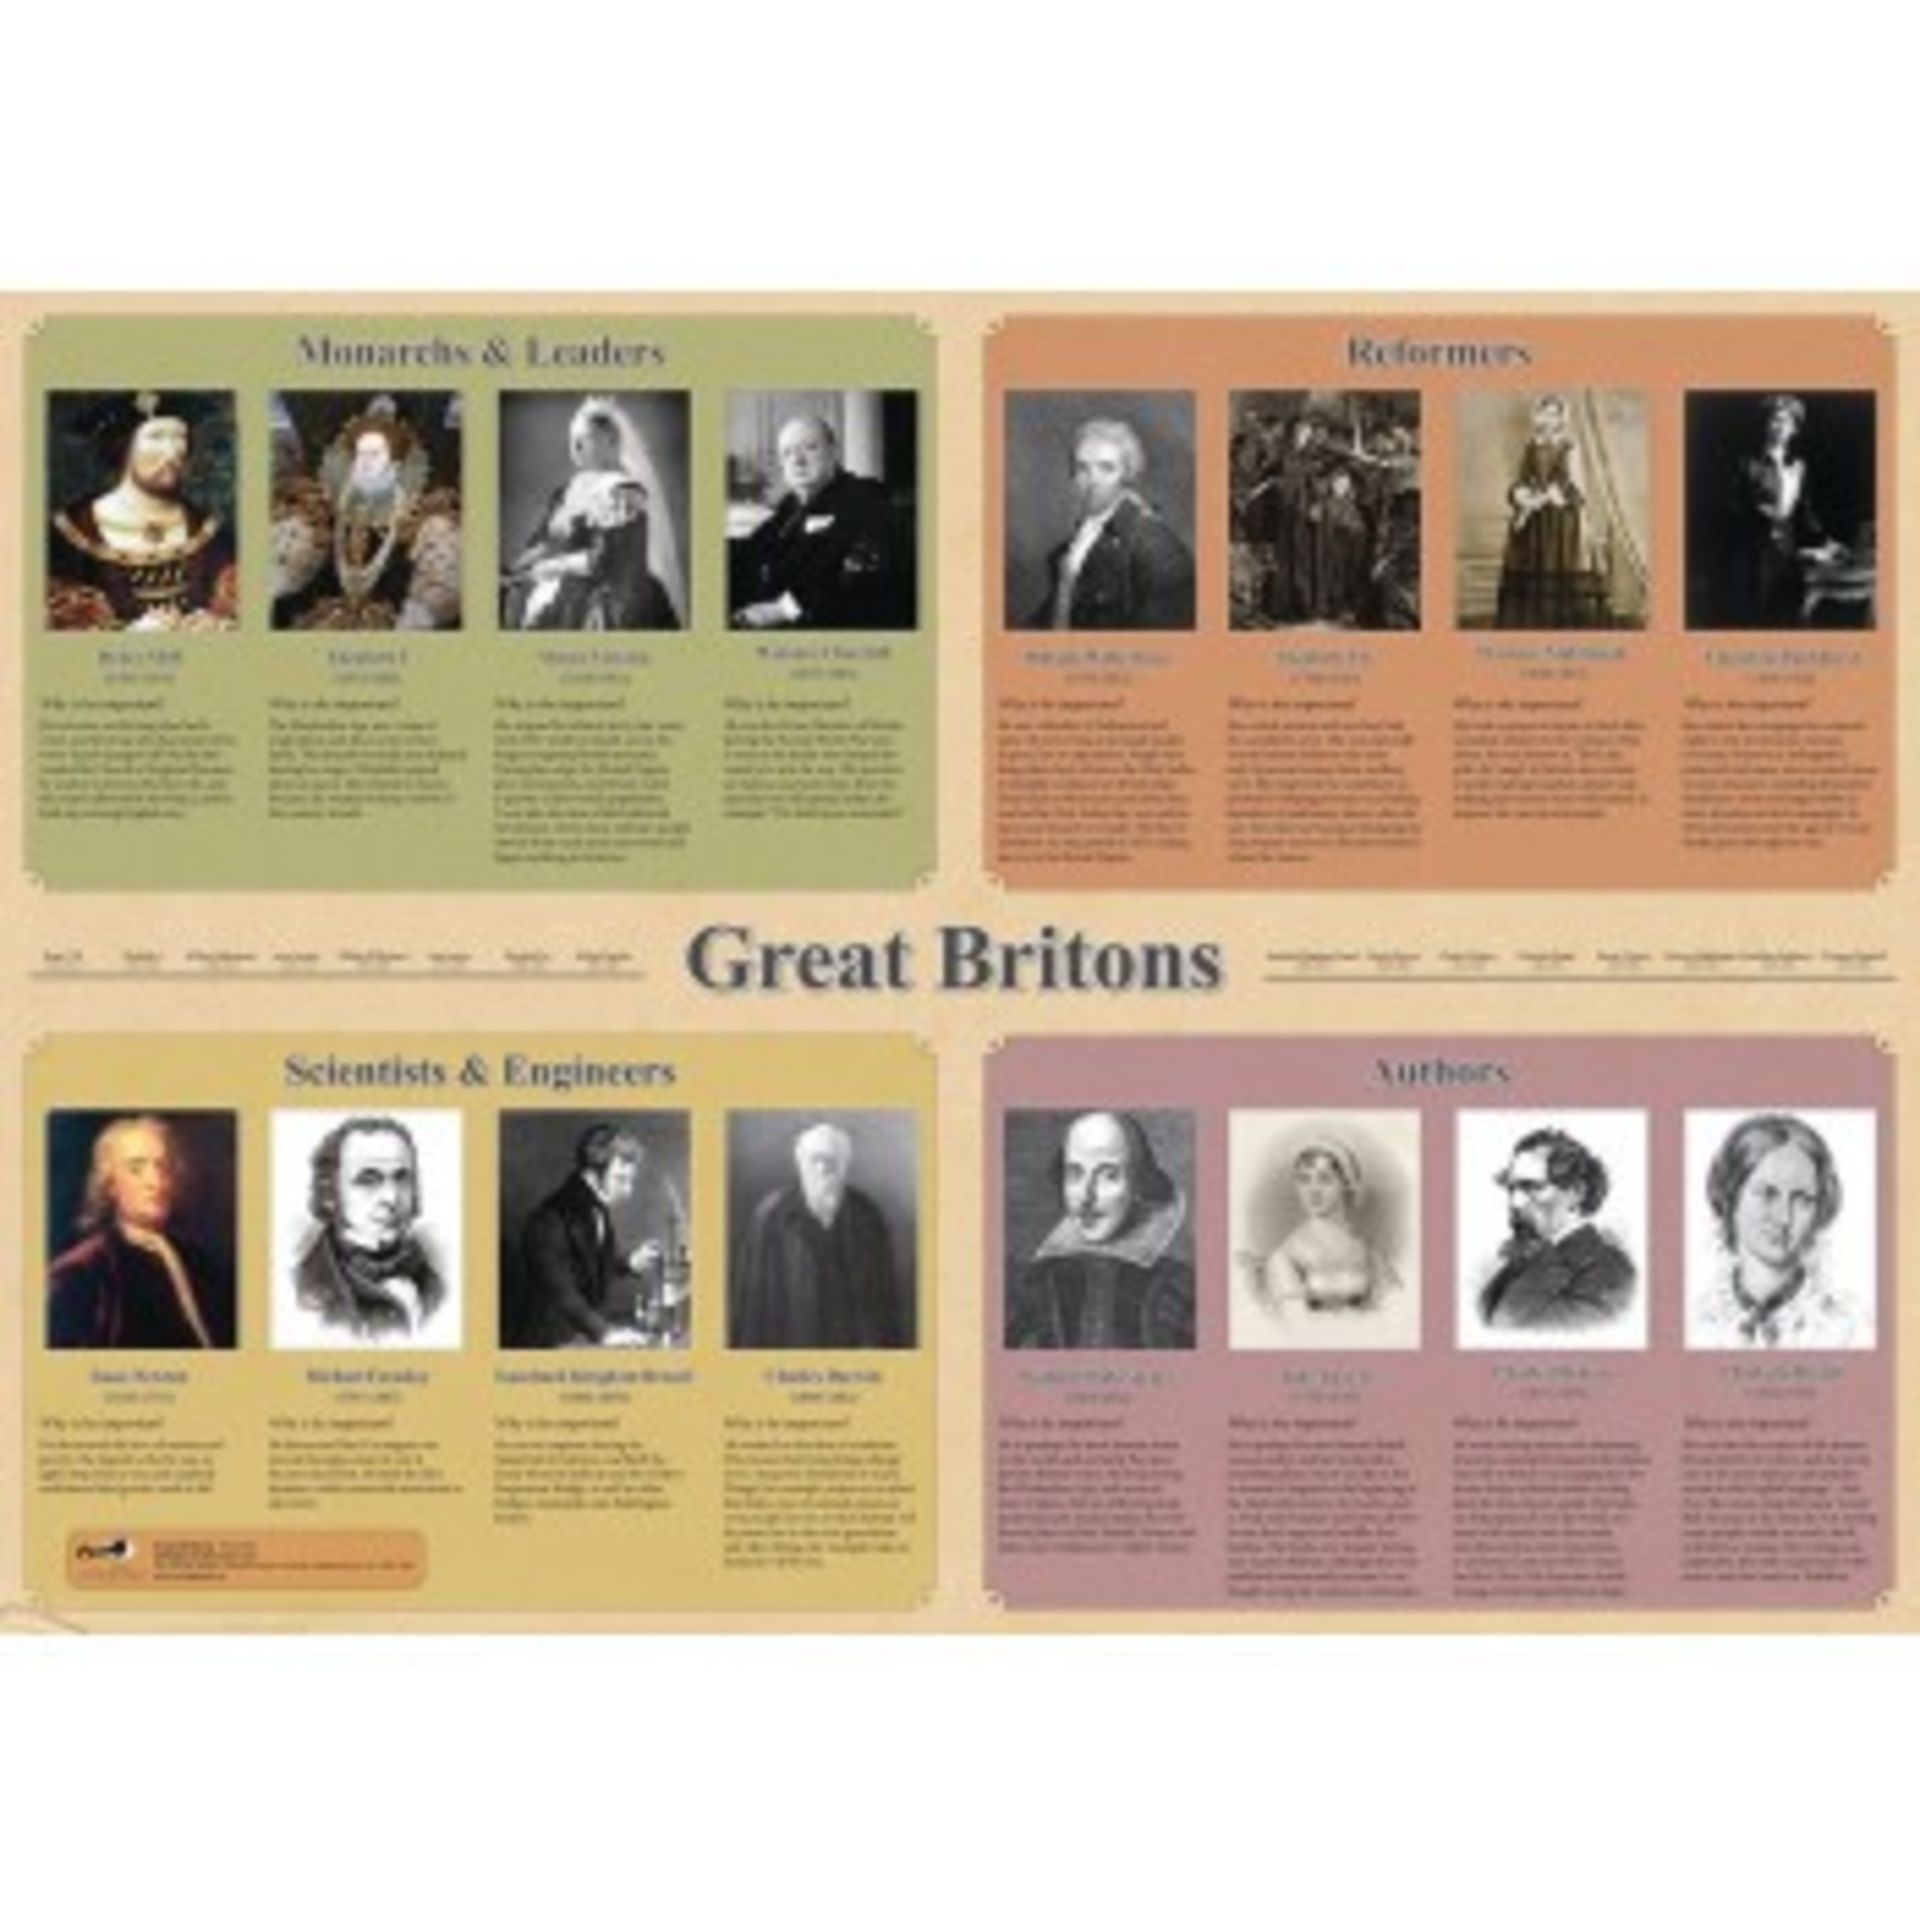 1 LOT TO CONTAIN 5 GREAT BRITONS POSTERS RRP £51.00 (VIEWING HIGHLY RECOMMENDED)